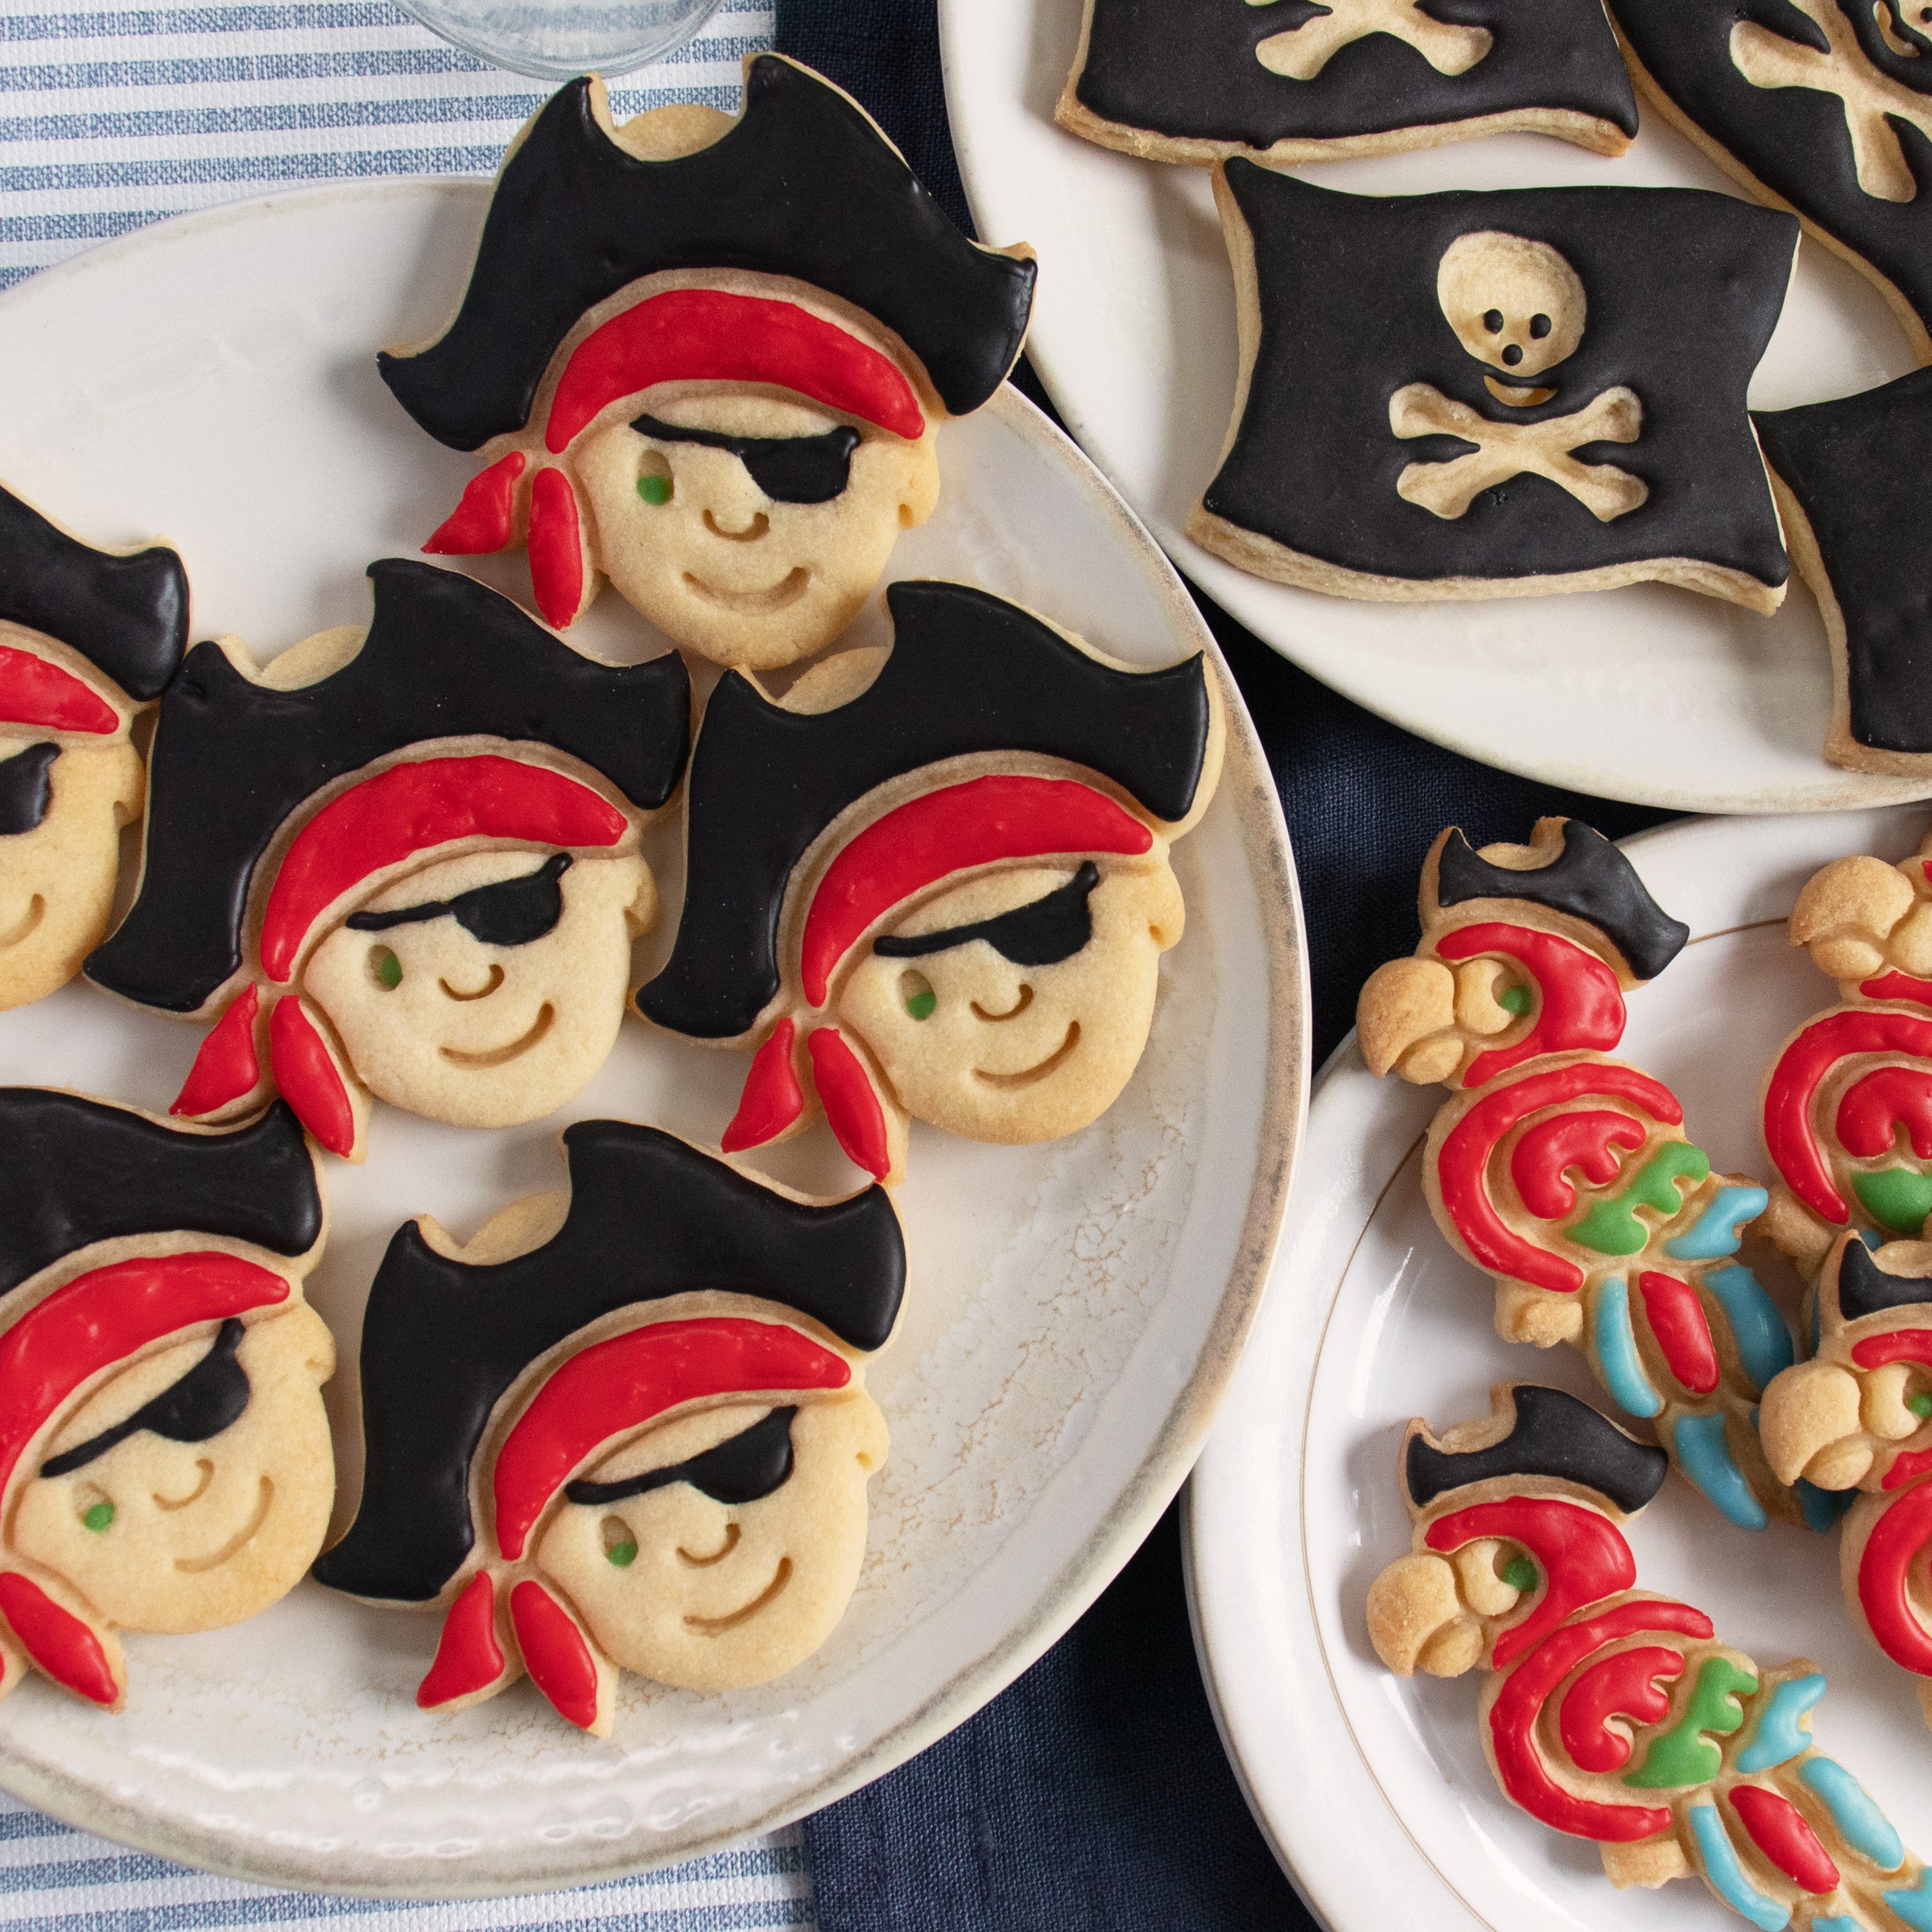 Set of 3 Cookie designs: Pirate Boy, Pirate Flag, Pirate Parrot